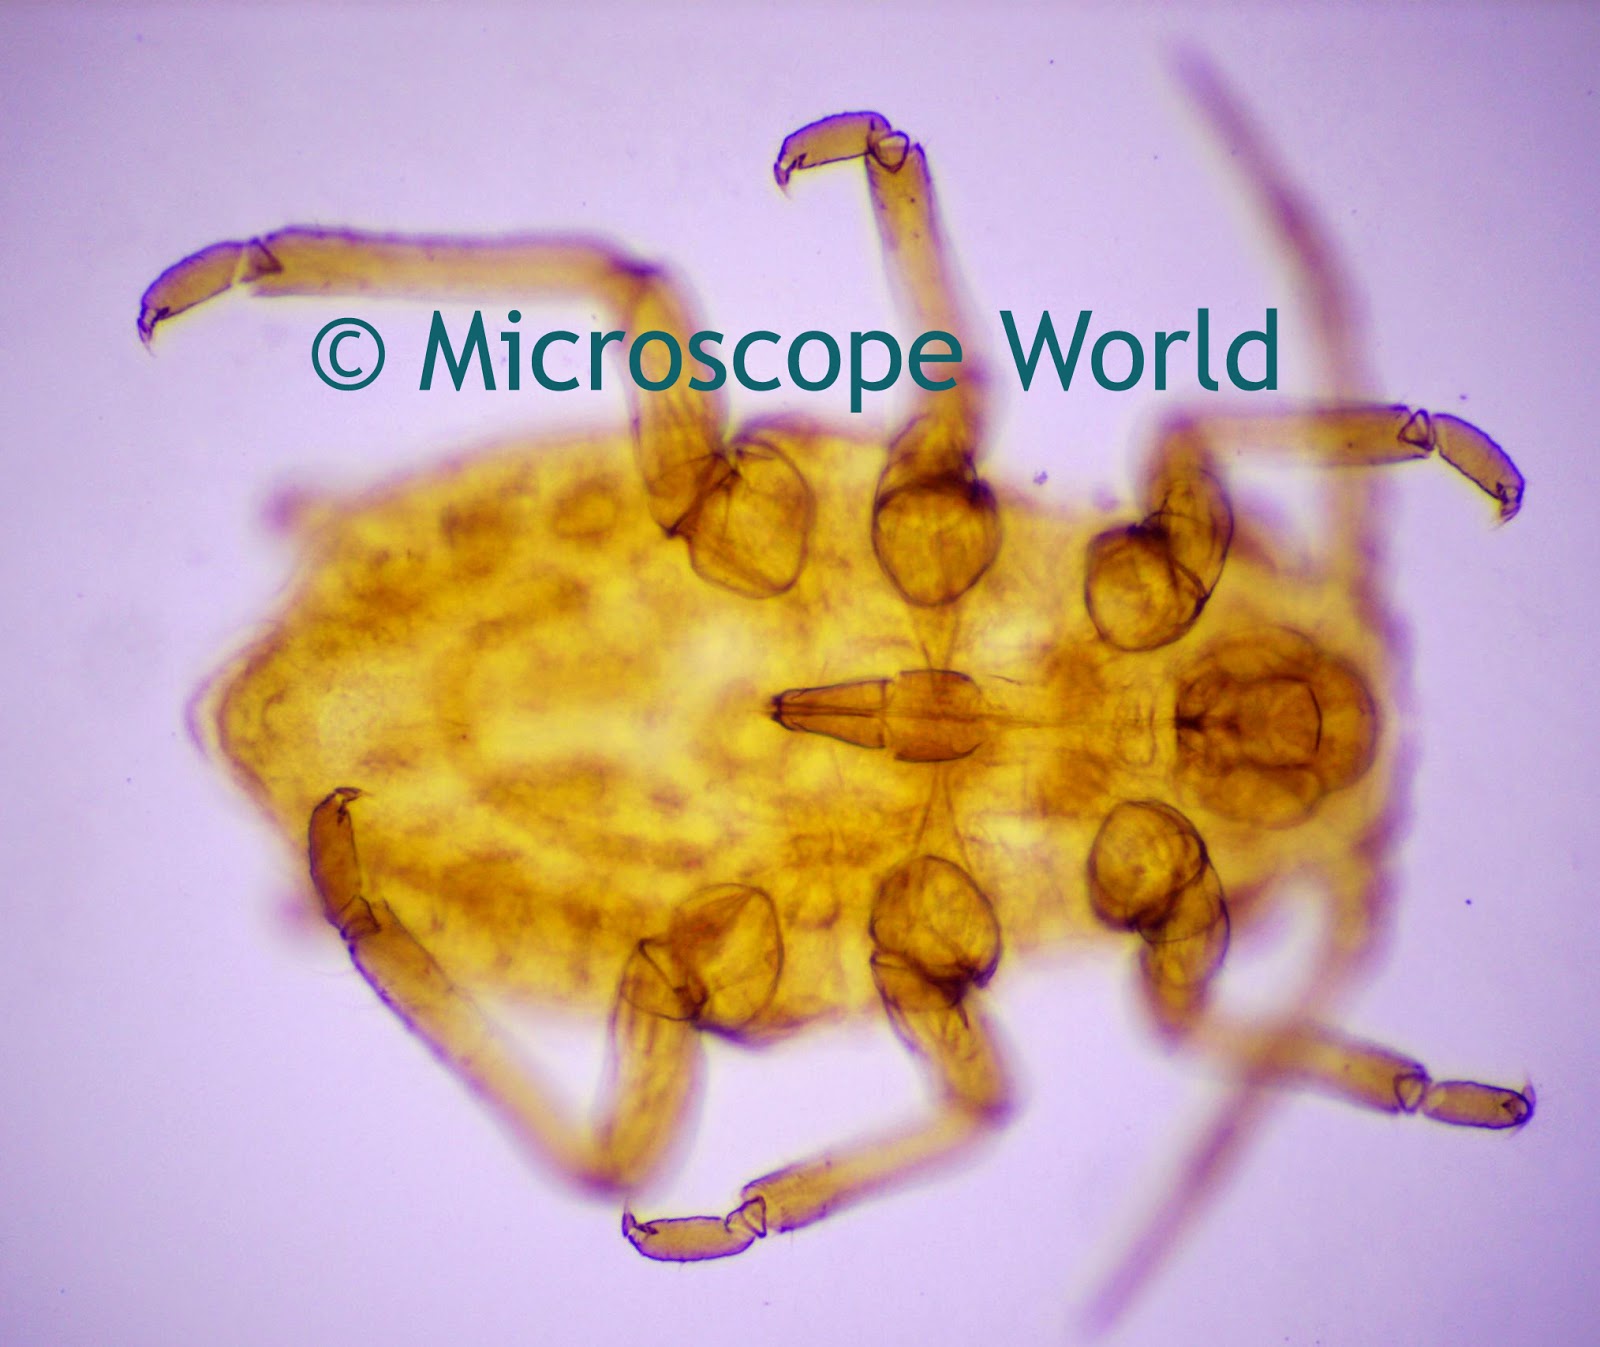 aphid under the microscope at 100x